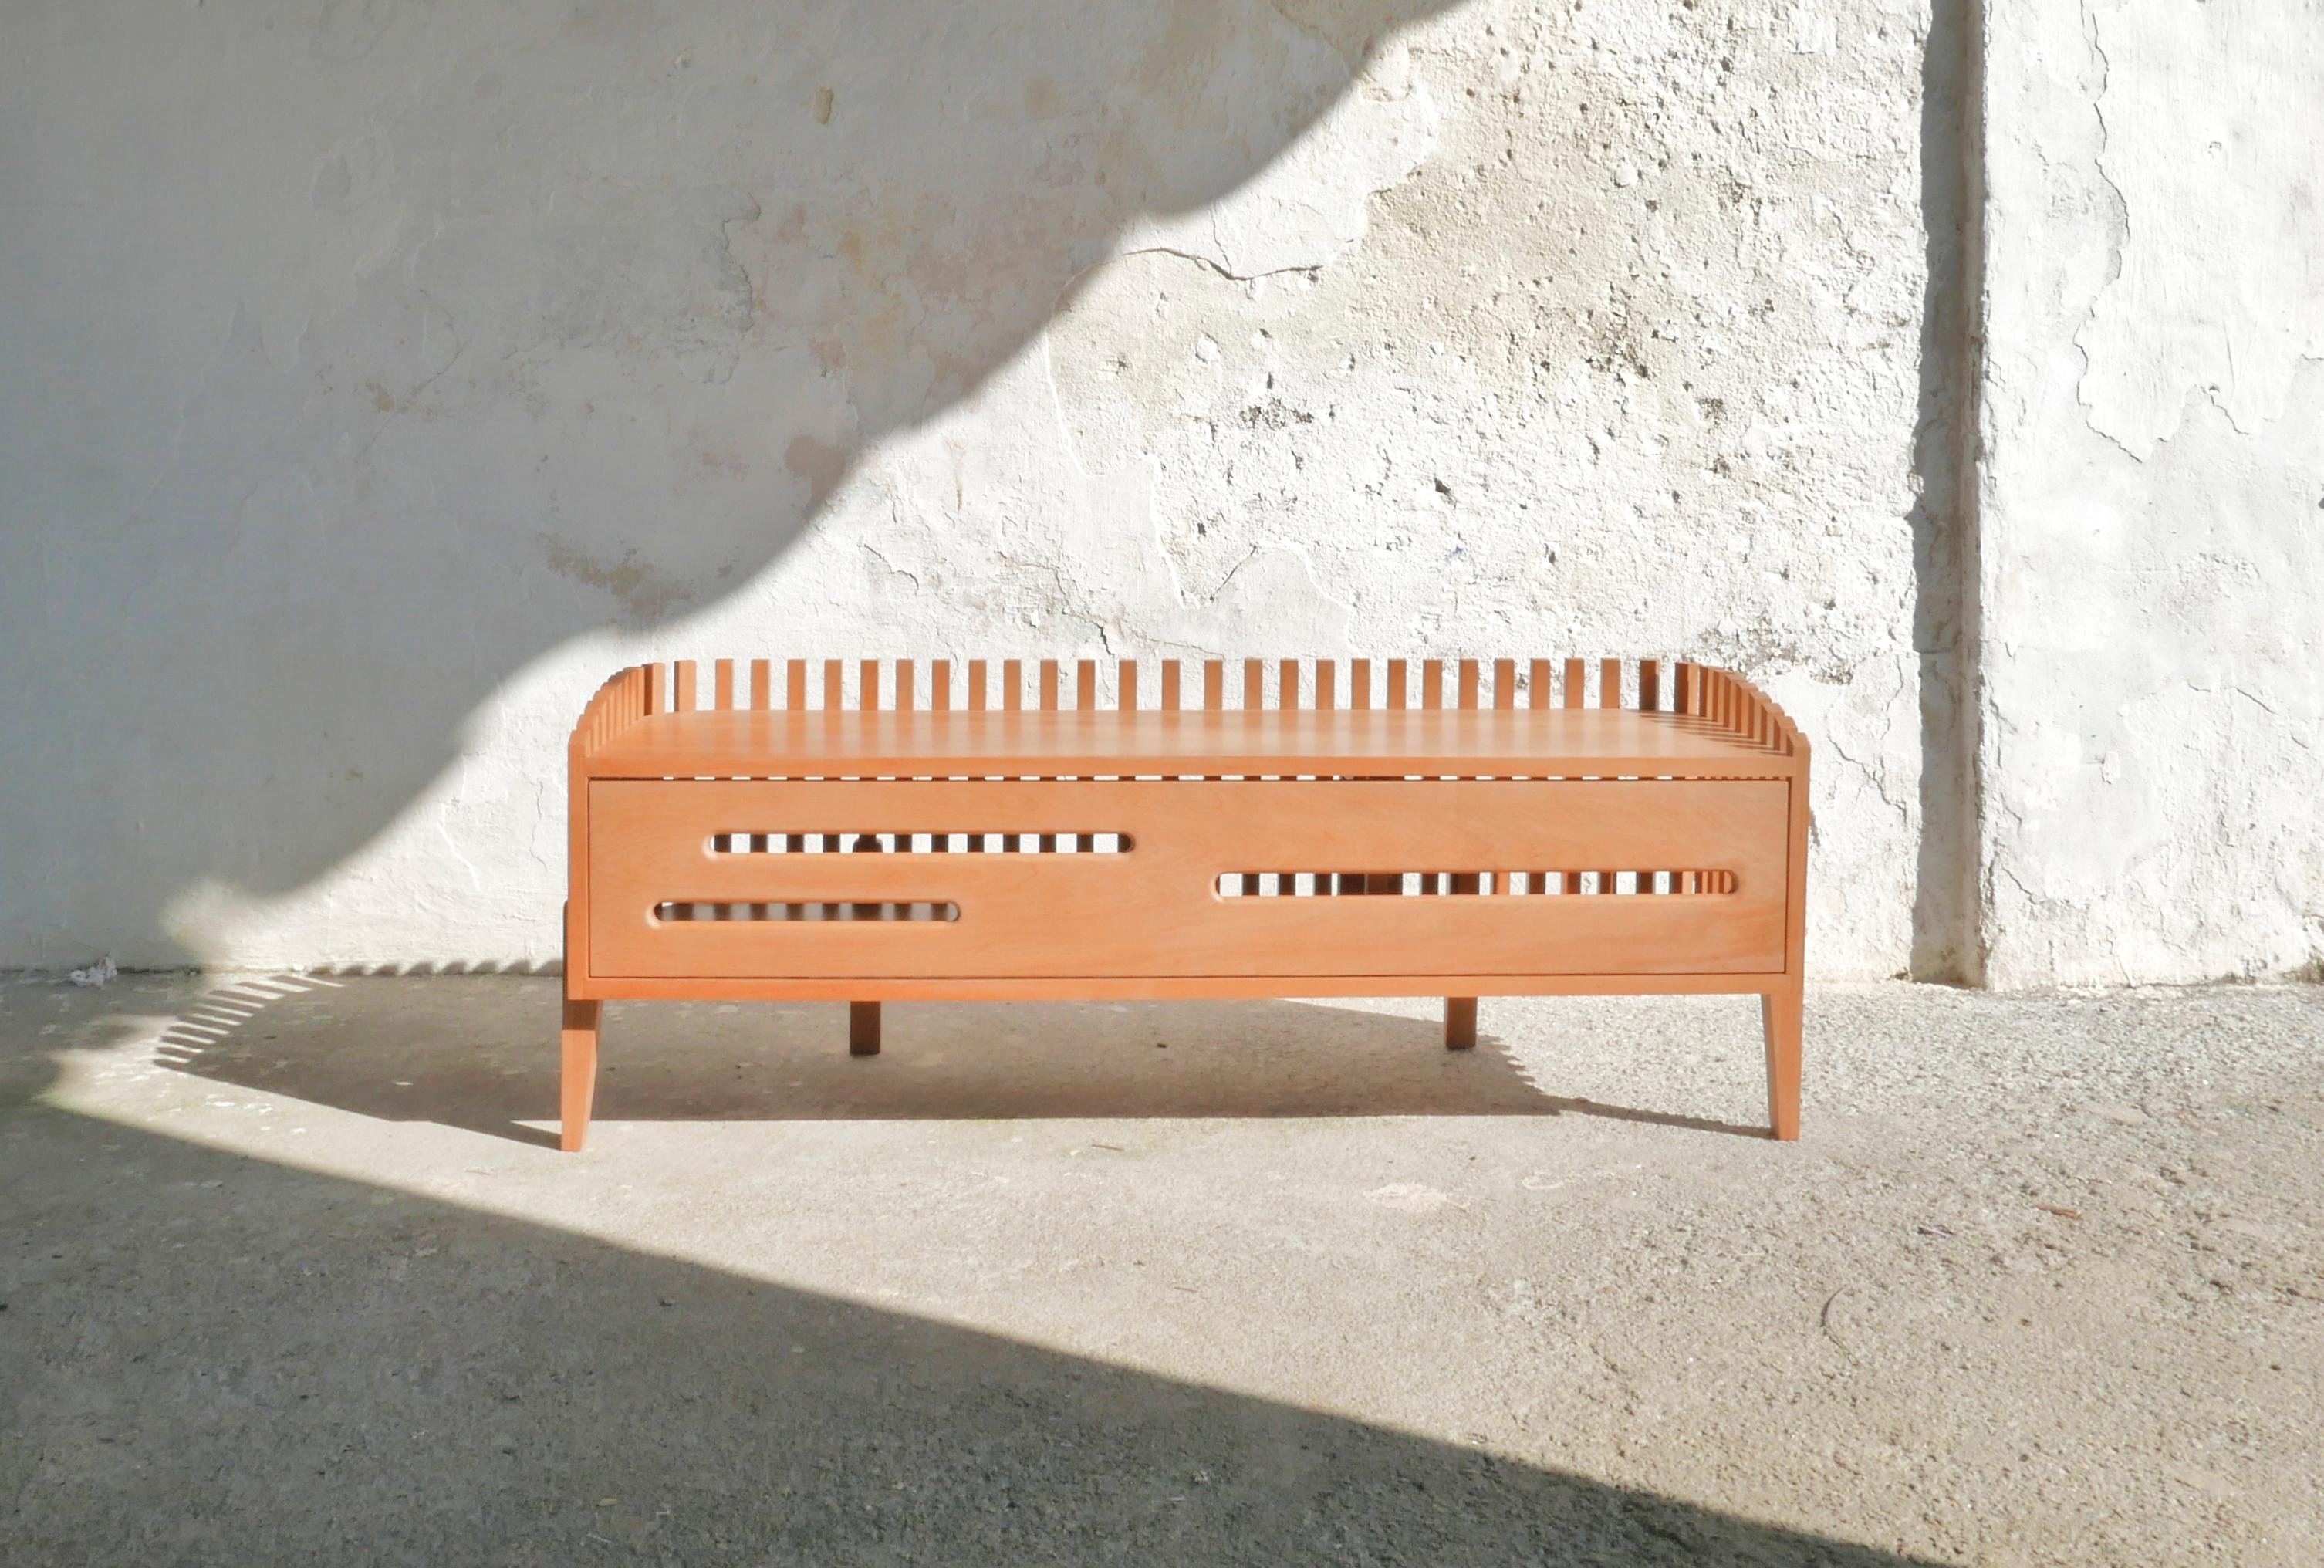 Arca shoe rack/bench is made up of thin slats of wood which encircle the piece supporting the main body and creating a sensation of movement. The slats permit constant ventilation while also creating an enclosed space.

Its minimalist form betrays